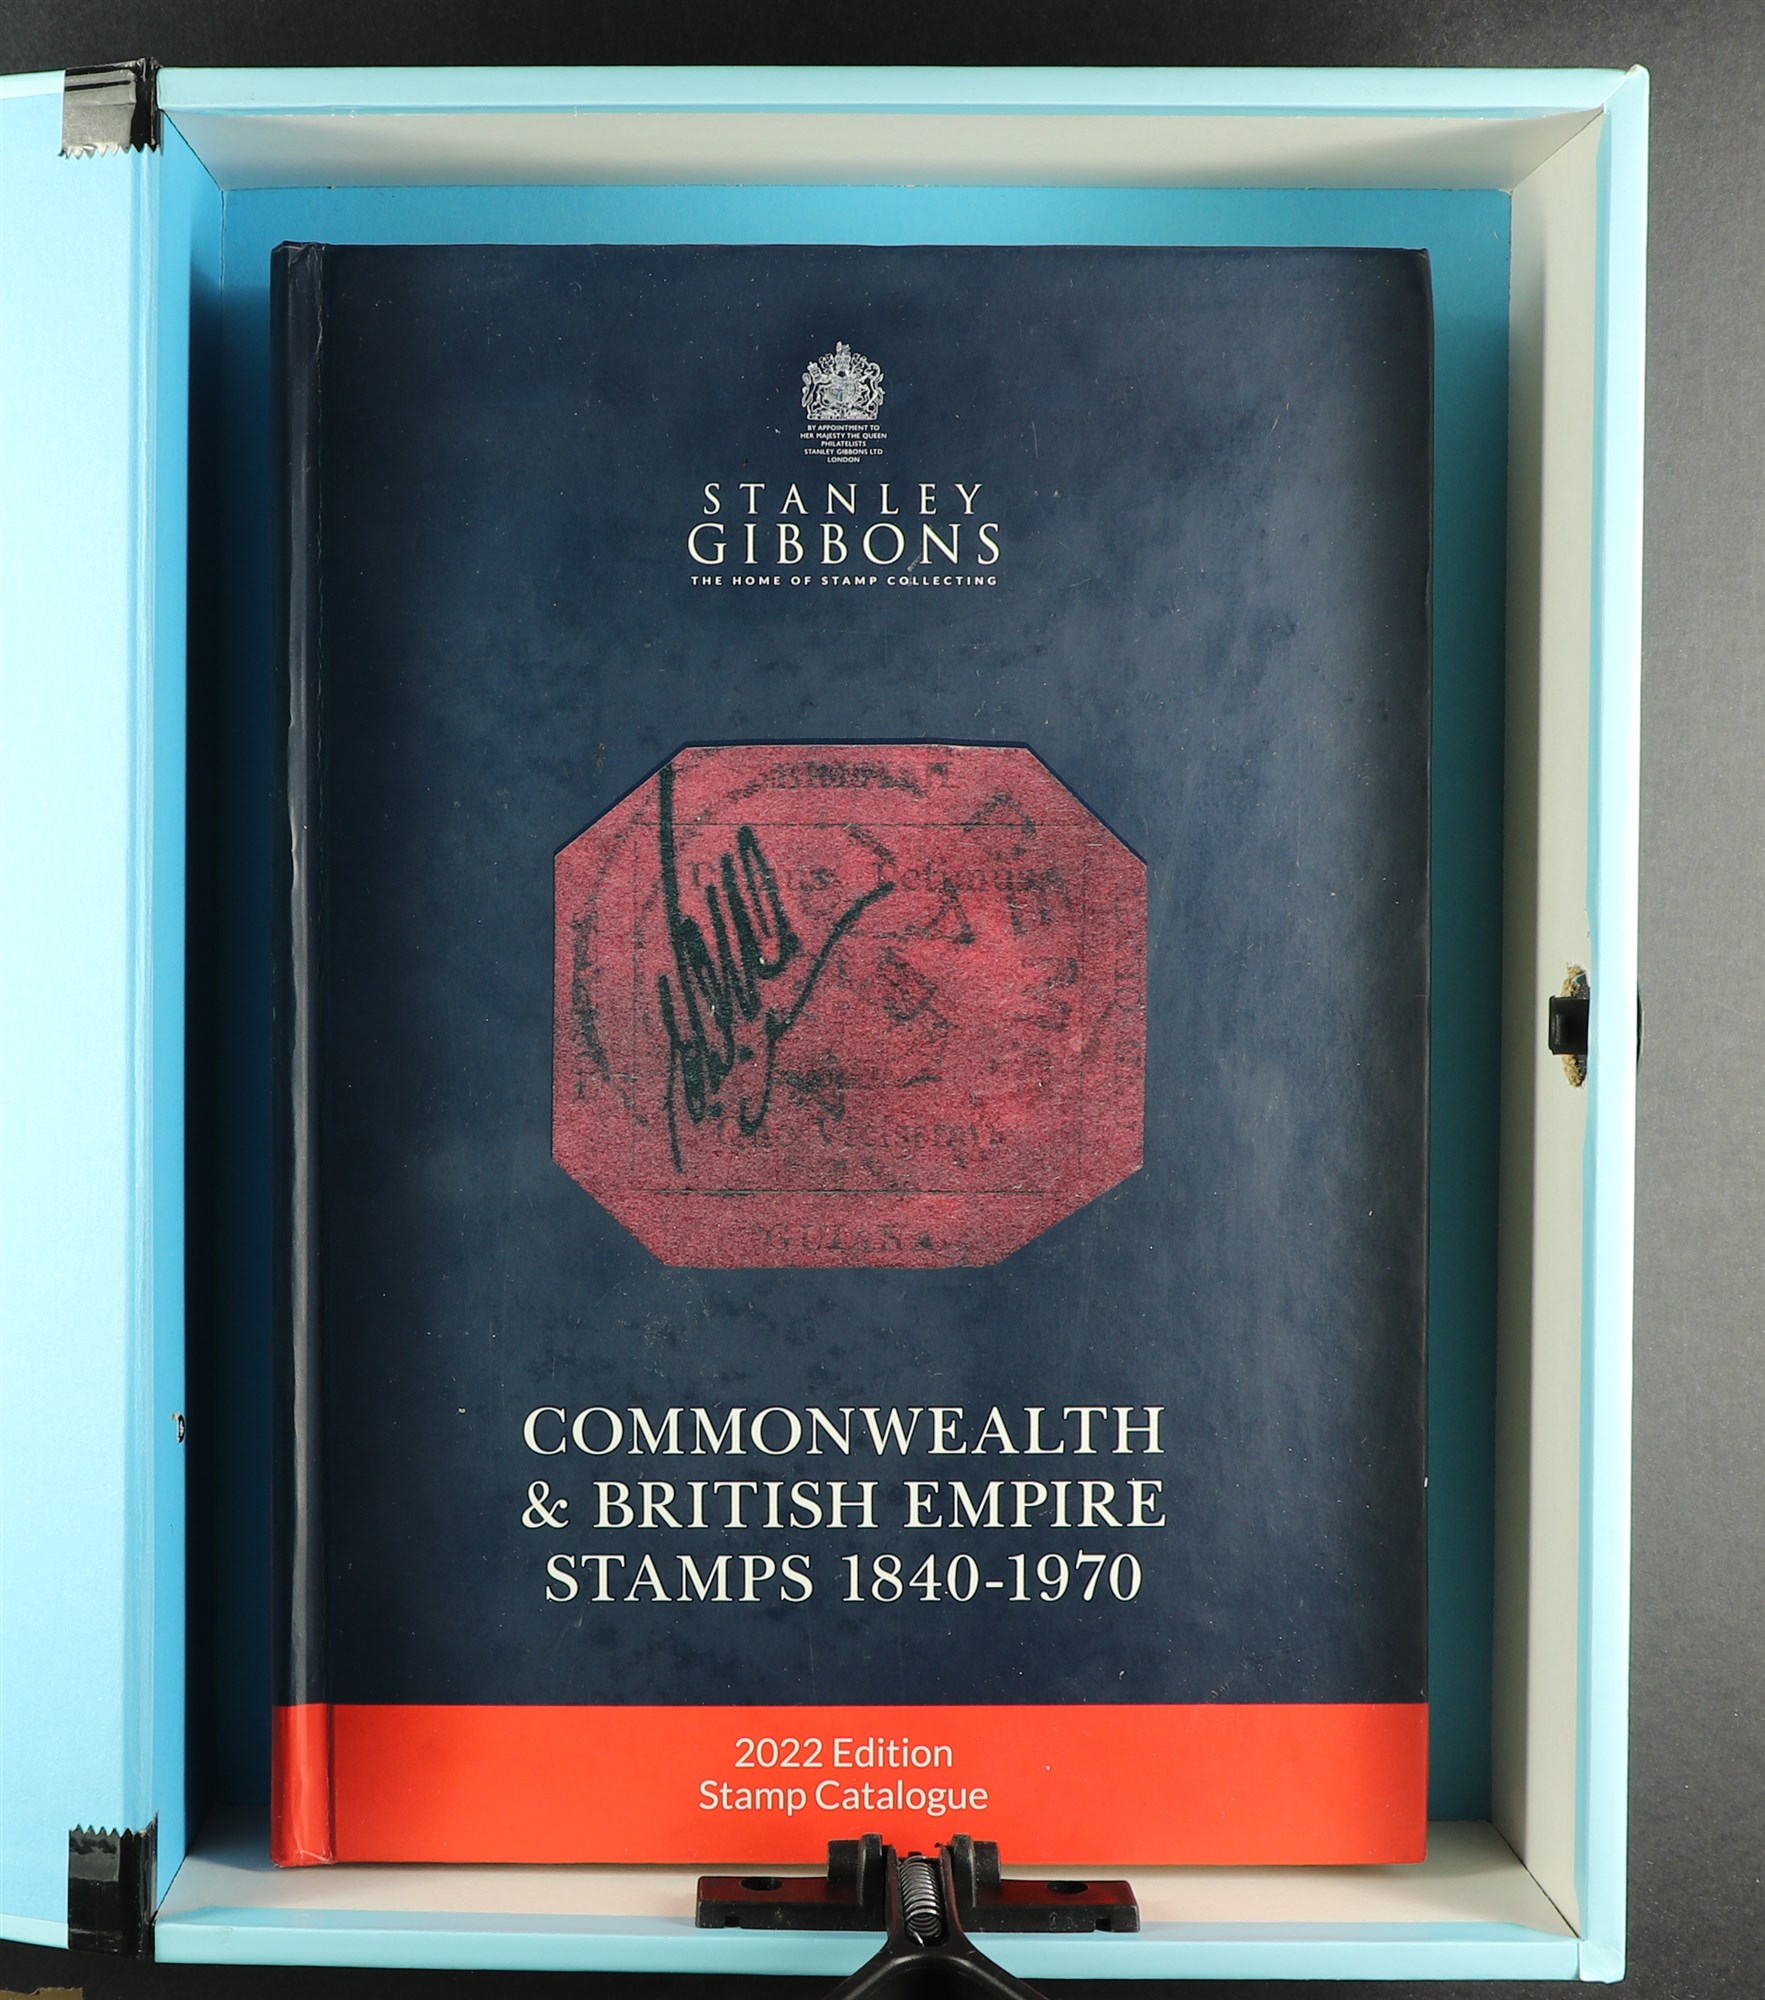 STANLEY GIBBONS 2022 COMMONWEALTH & BRITISH EMPIRE STAMPS 1940-1970 catalogue.